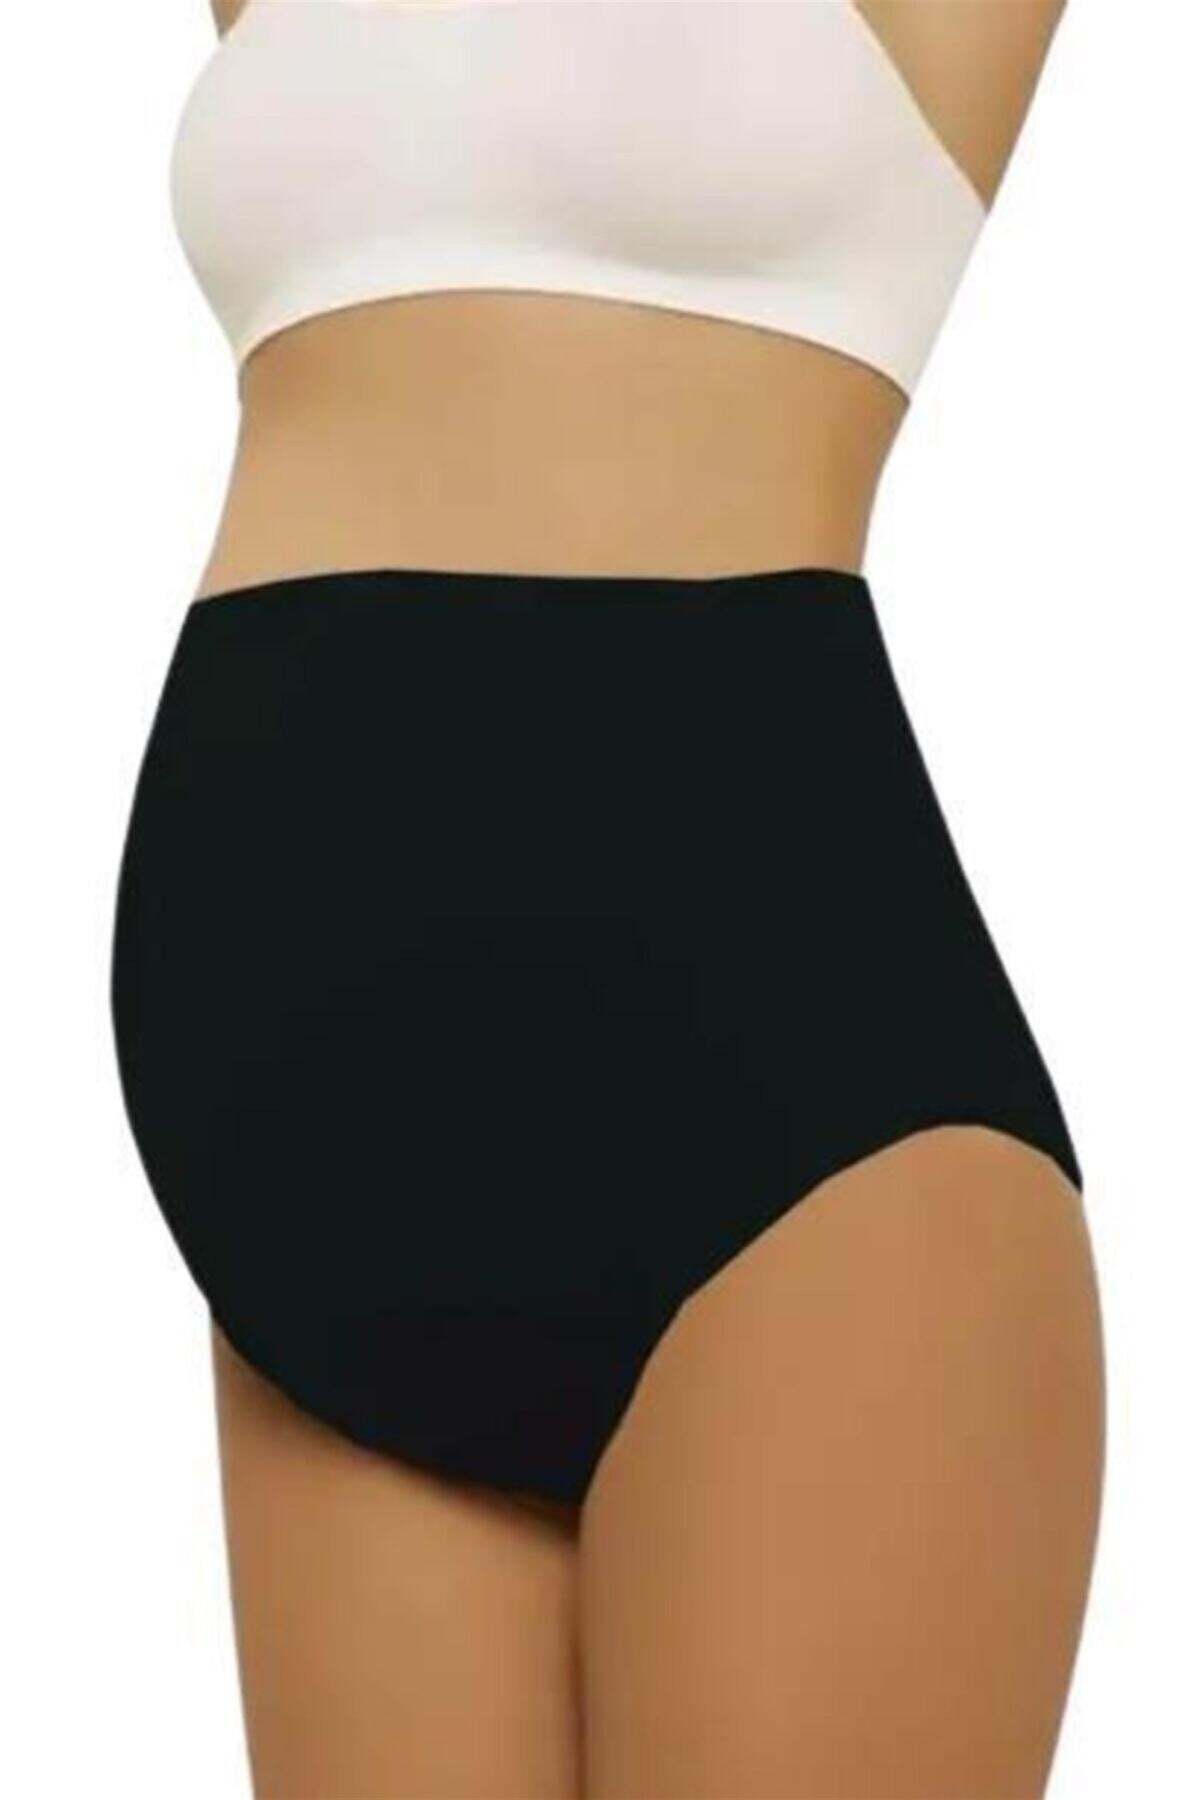 Shopymommy Firming Slip Maternity Panties - 5210